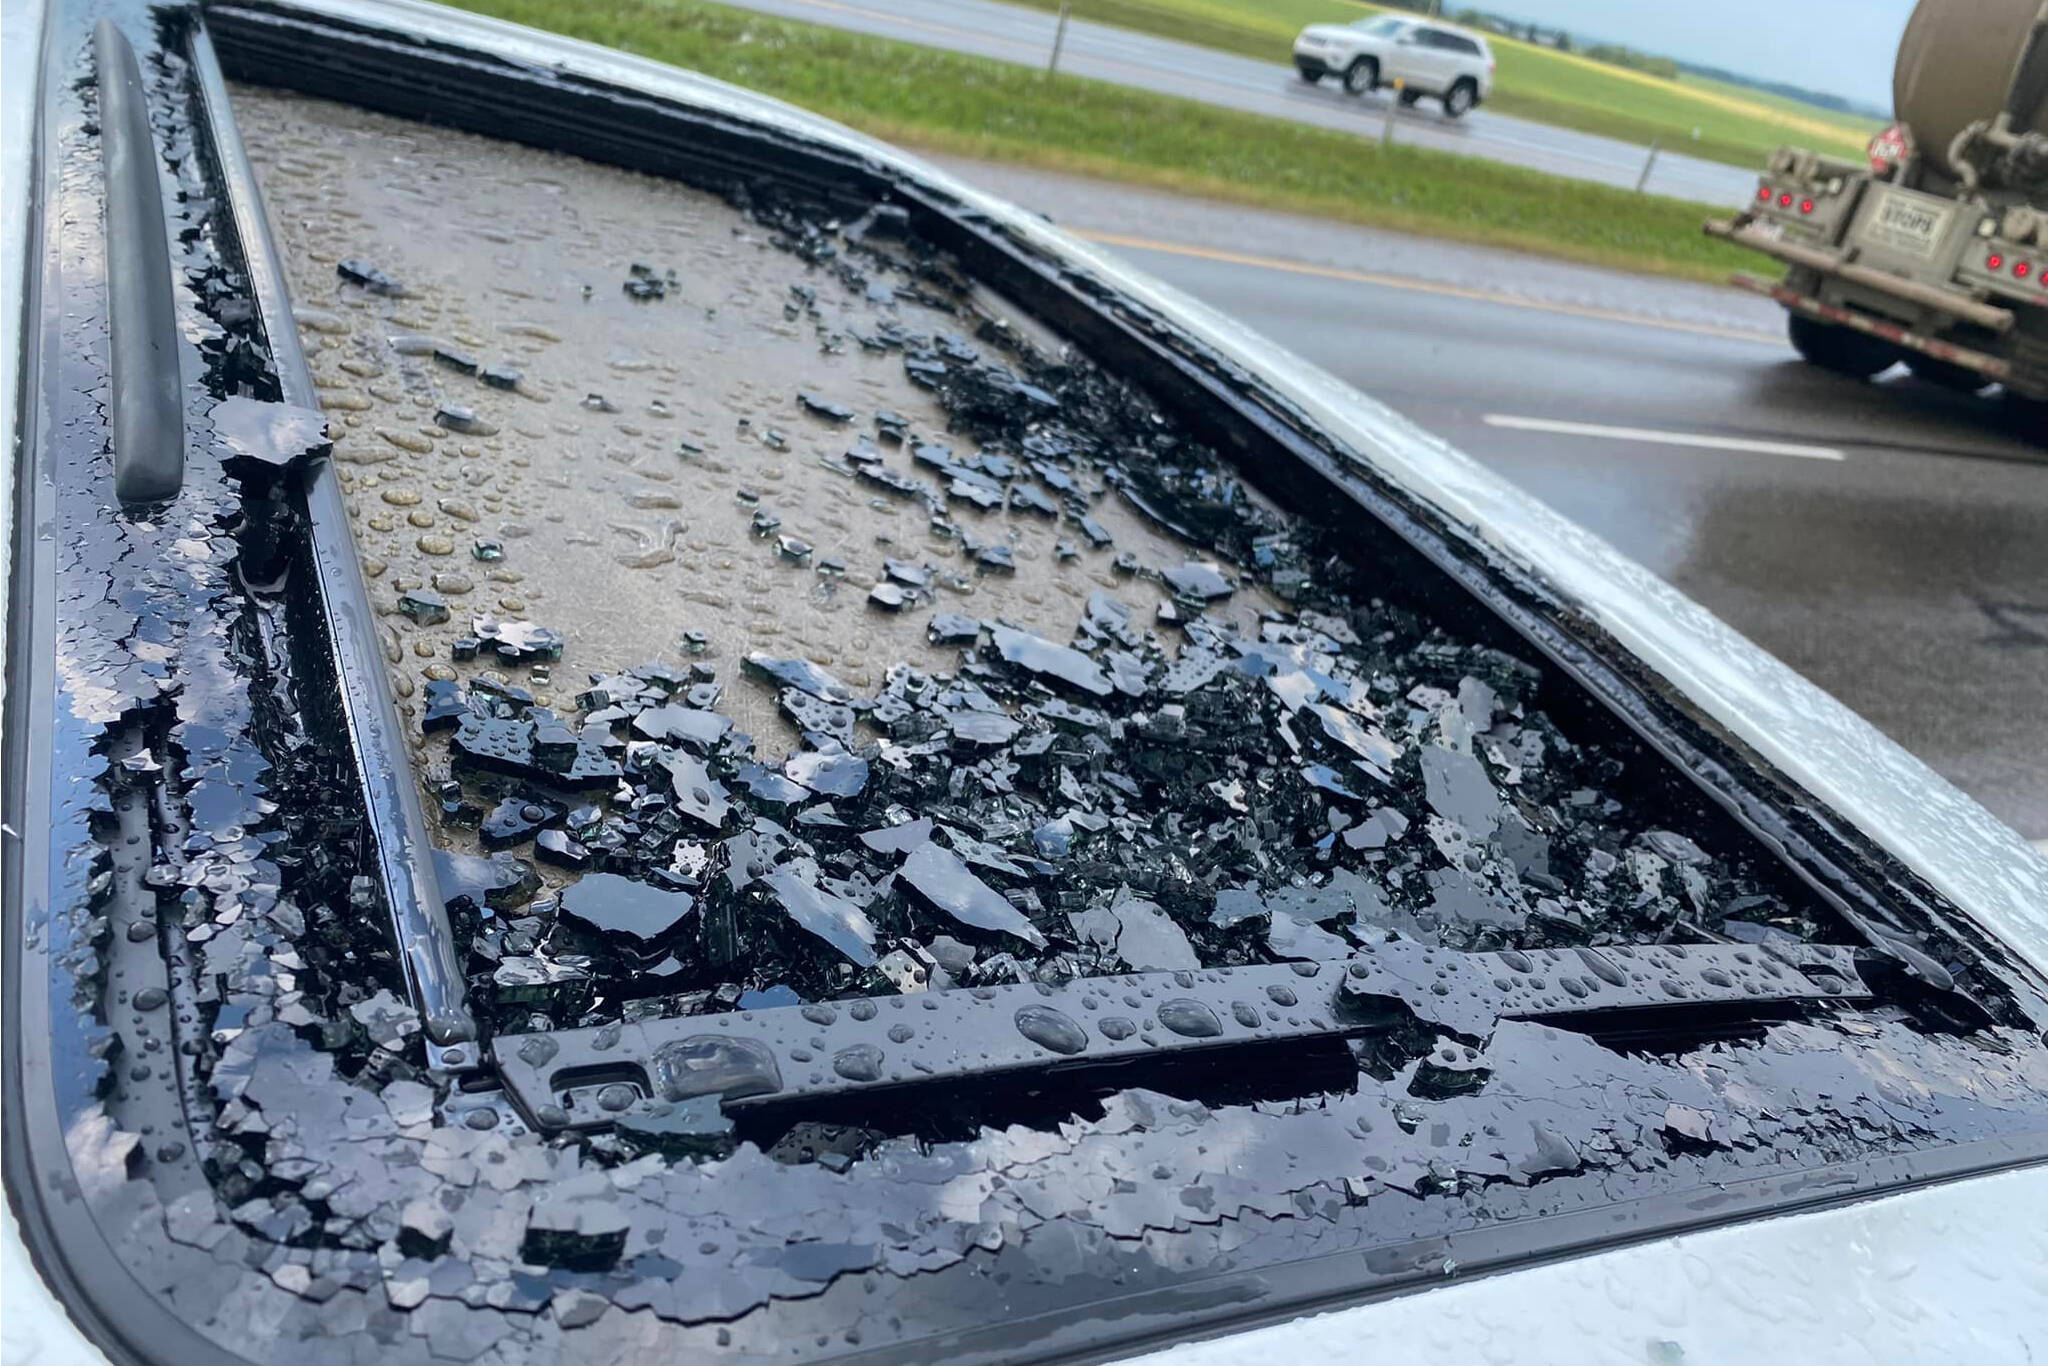 The dual sunroofs were completely destroyed in the hailstorm. Photo supplied